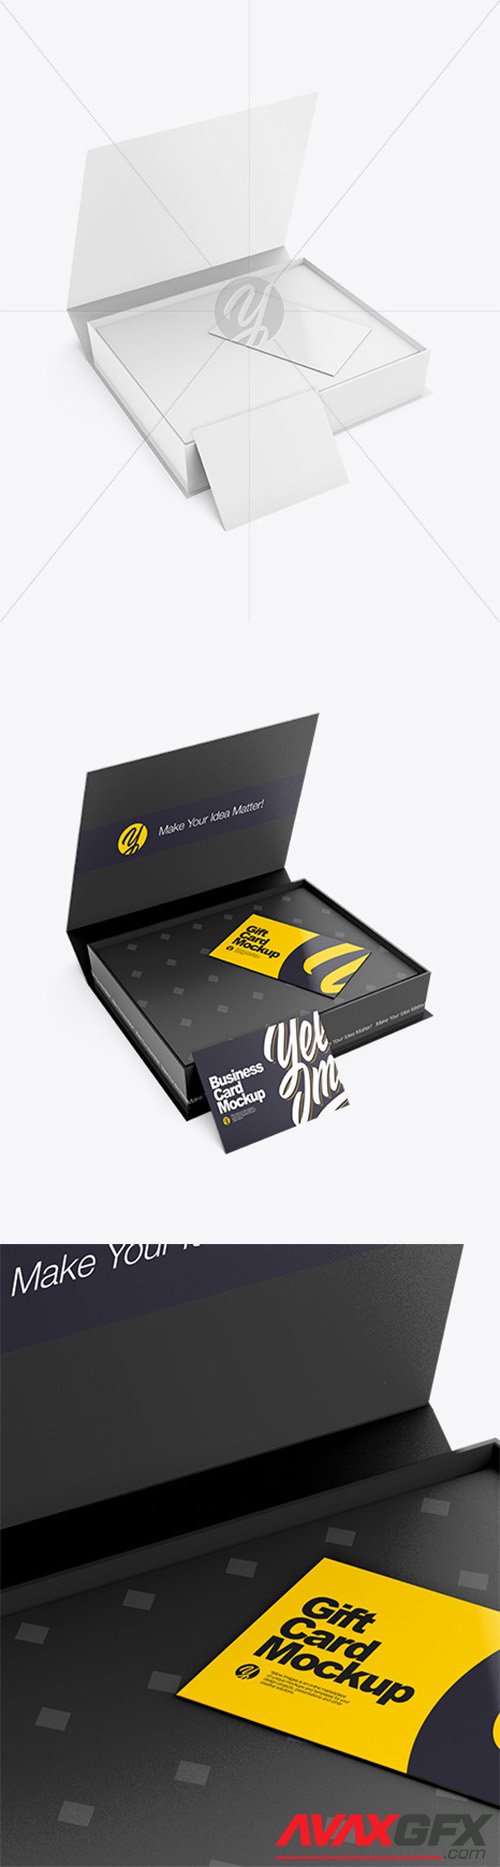 Business Cards in a Box Mockup - Half Side View 67785